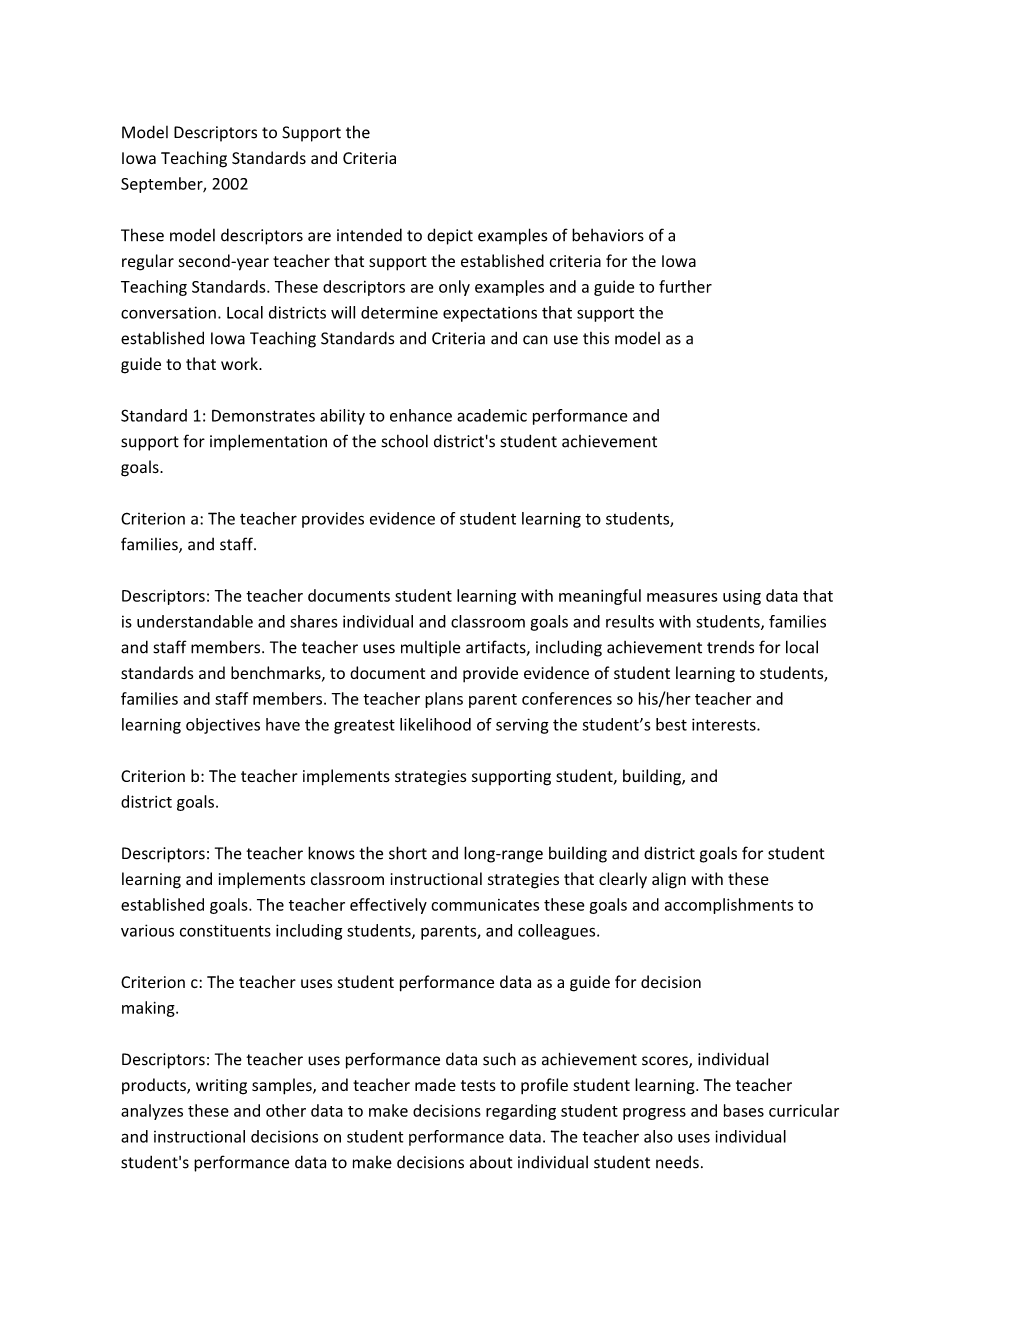 Model Descriptors to Support the Iowa Teaching Standards and Criteria September, 2002 These